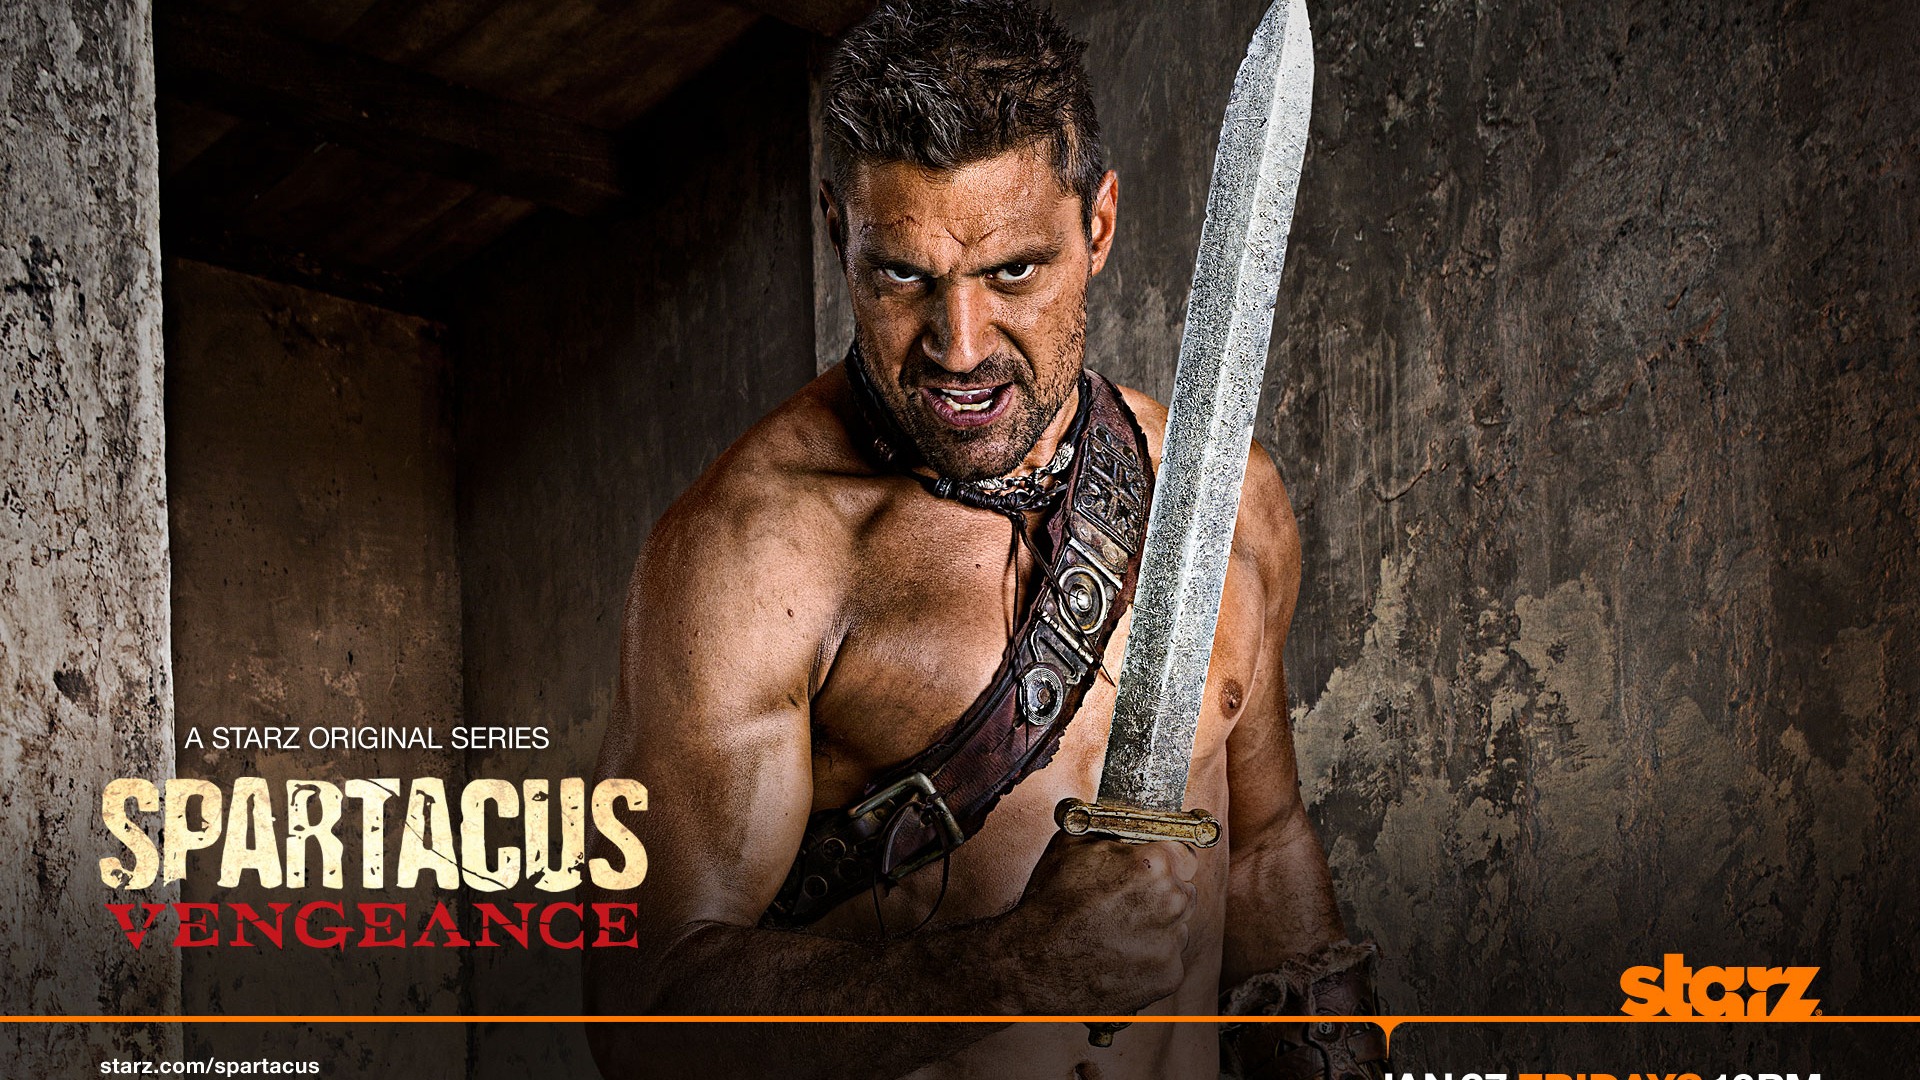 Spartacus: Vengeance HD wallpapers #11 - 1920x1080